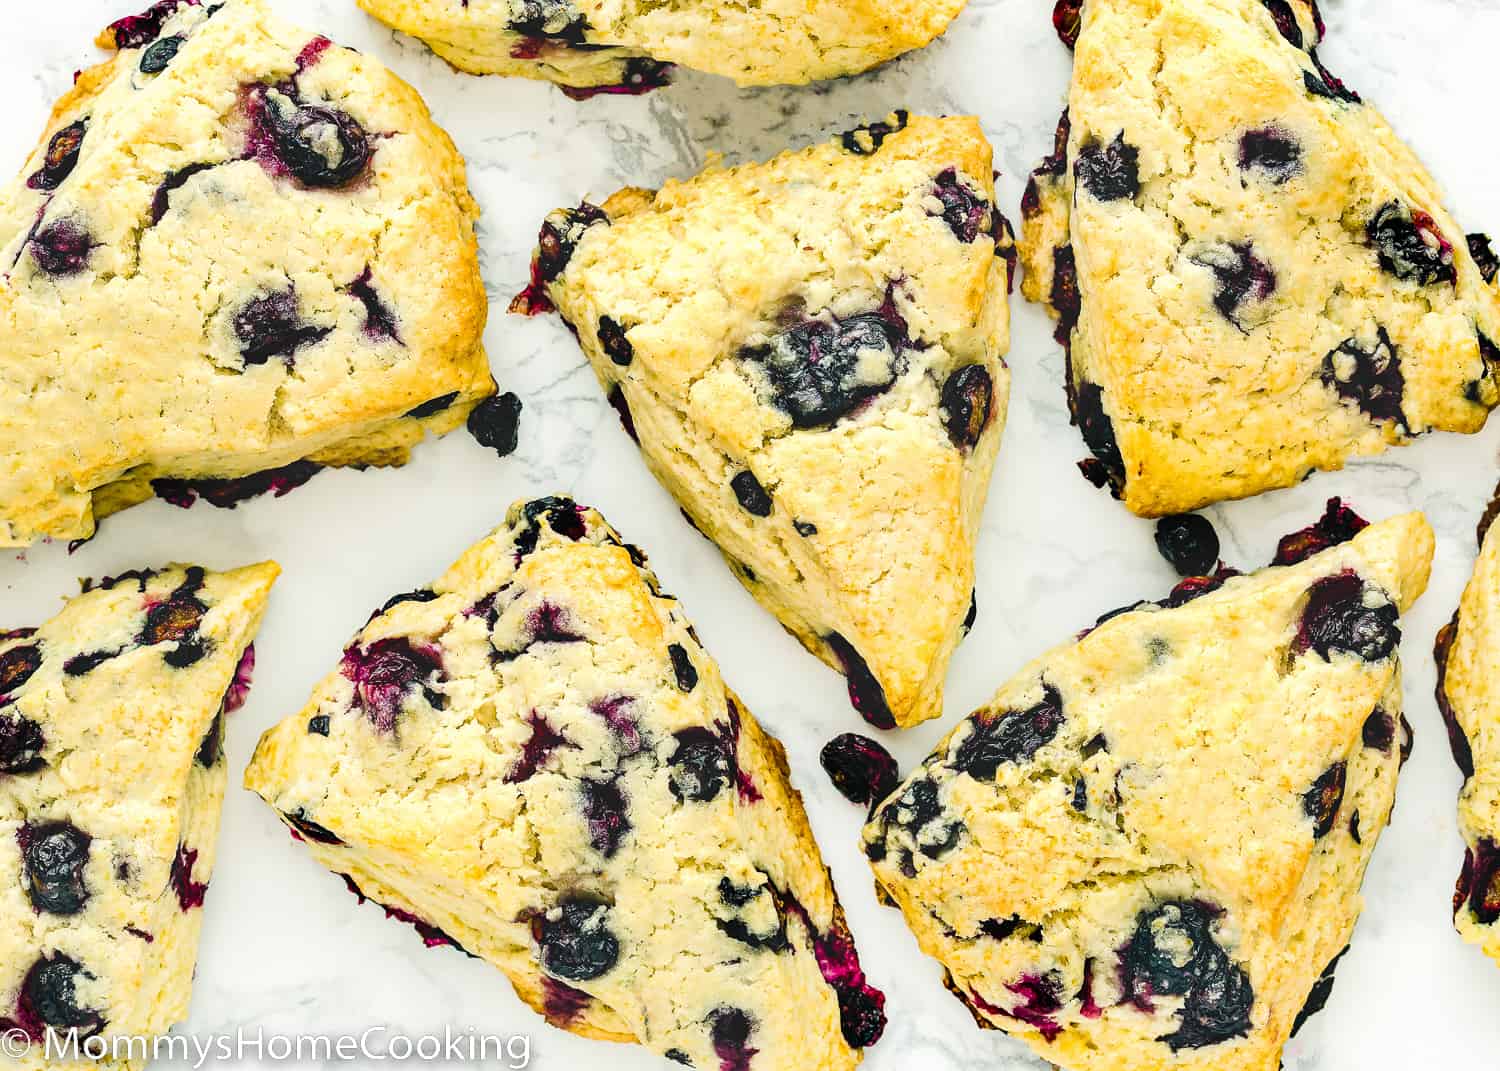 Baked Eggless Blueberry Scones over a marble surface.